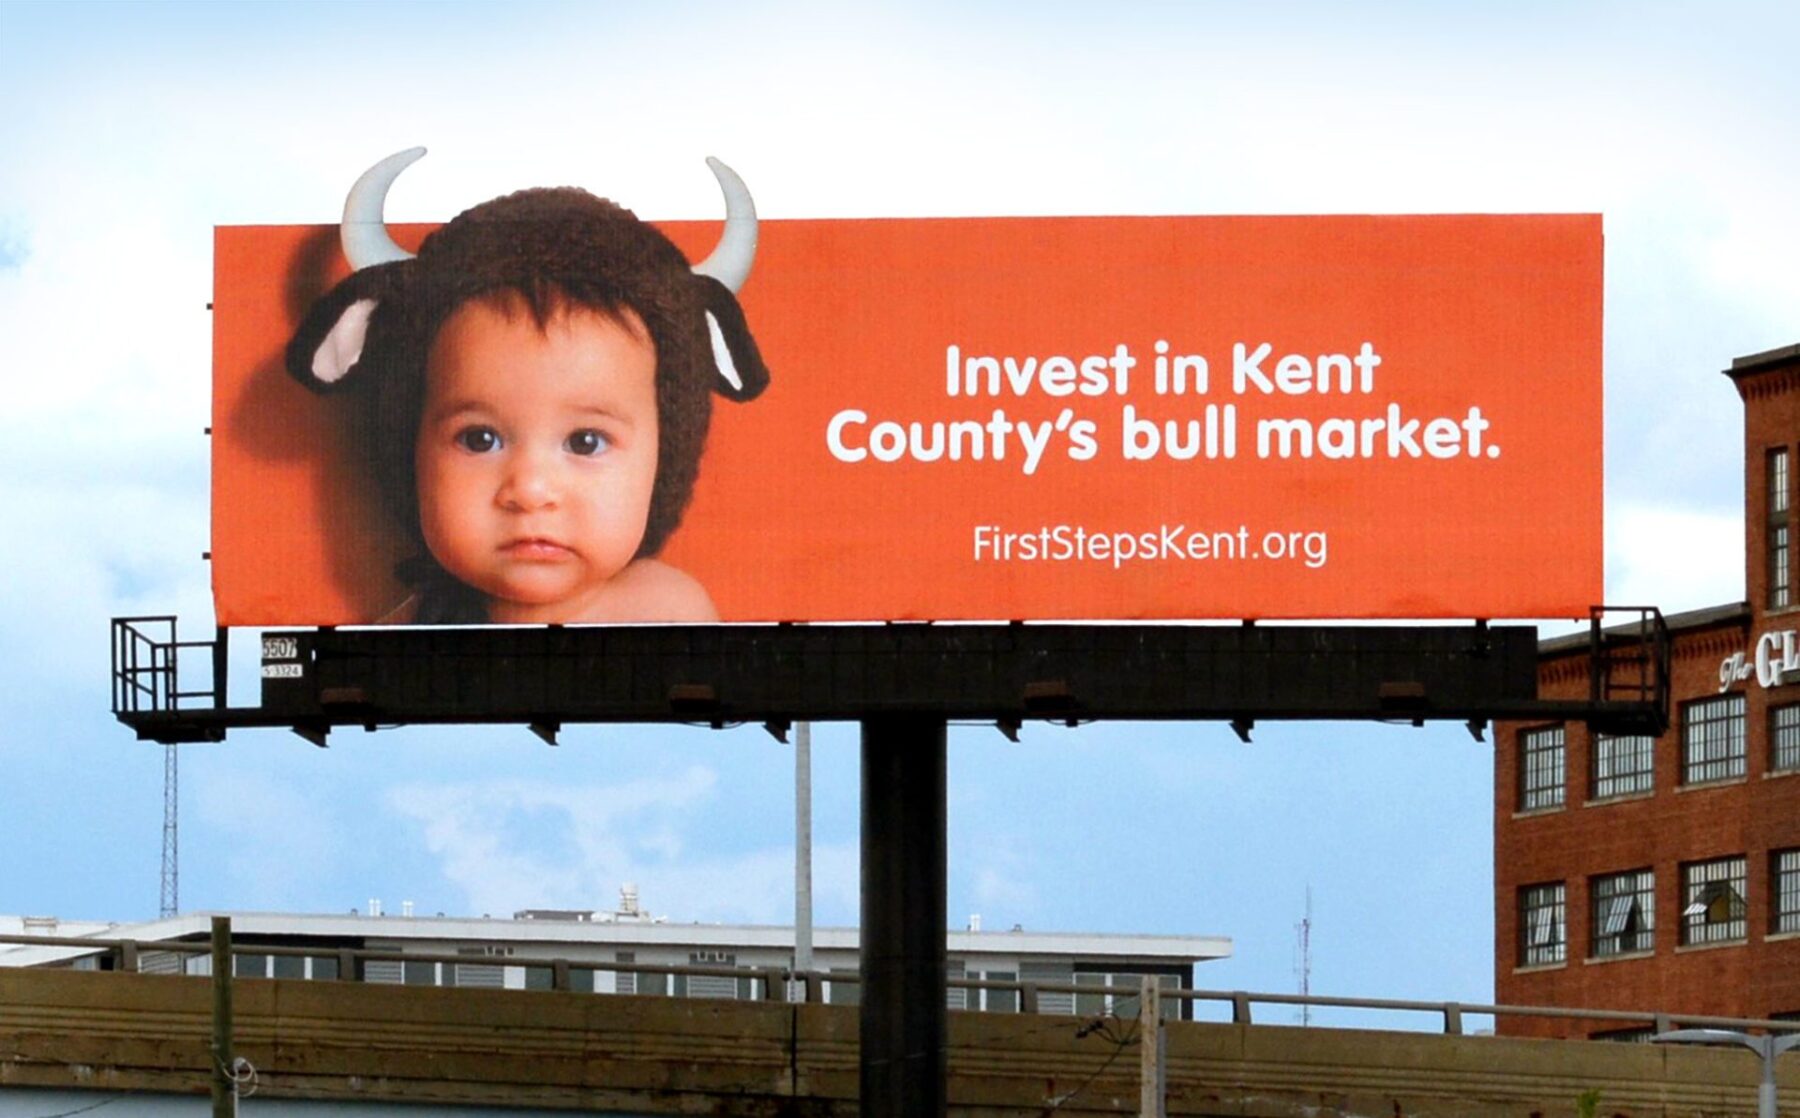 FirstStepsKent.org Invest in Kent County's bull market.